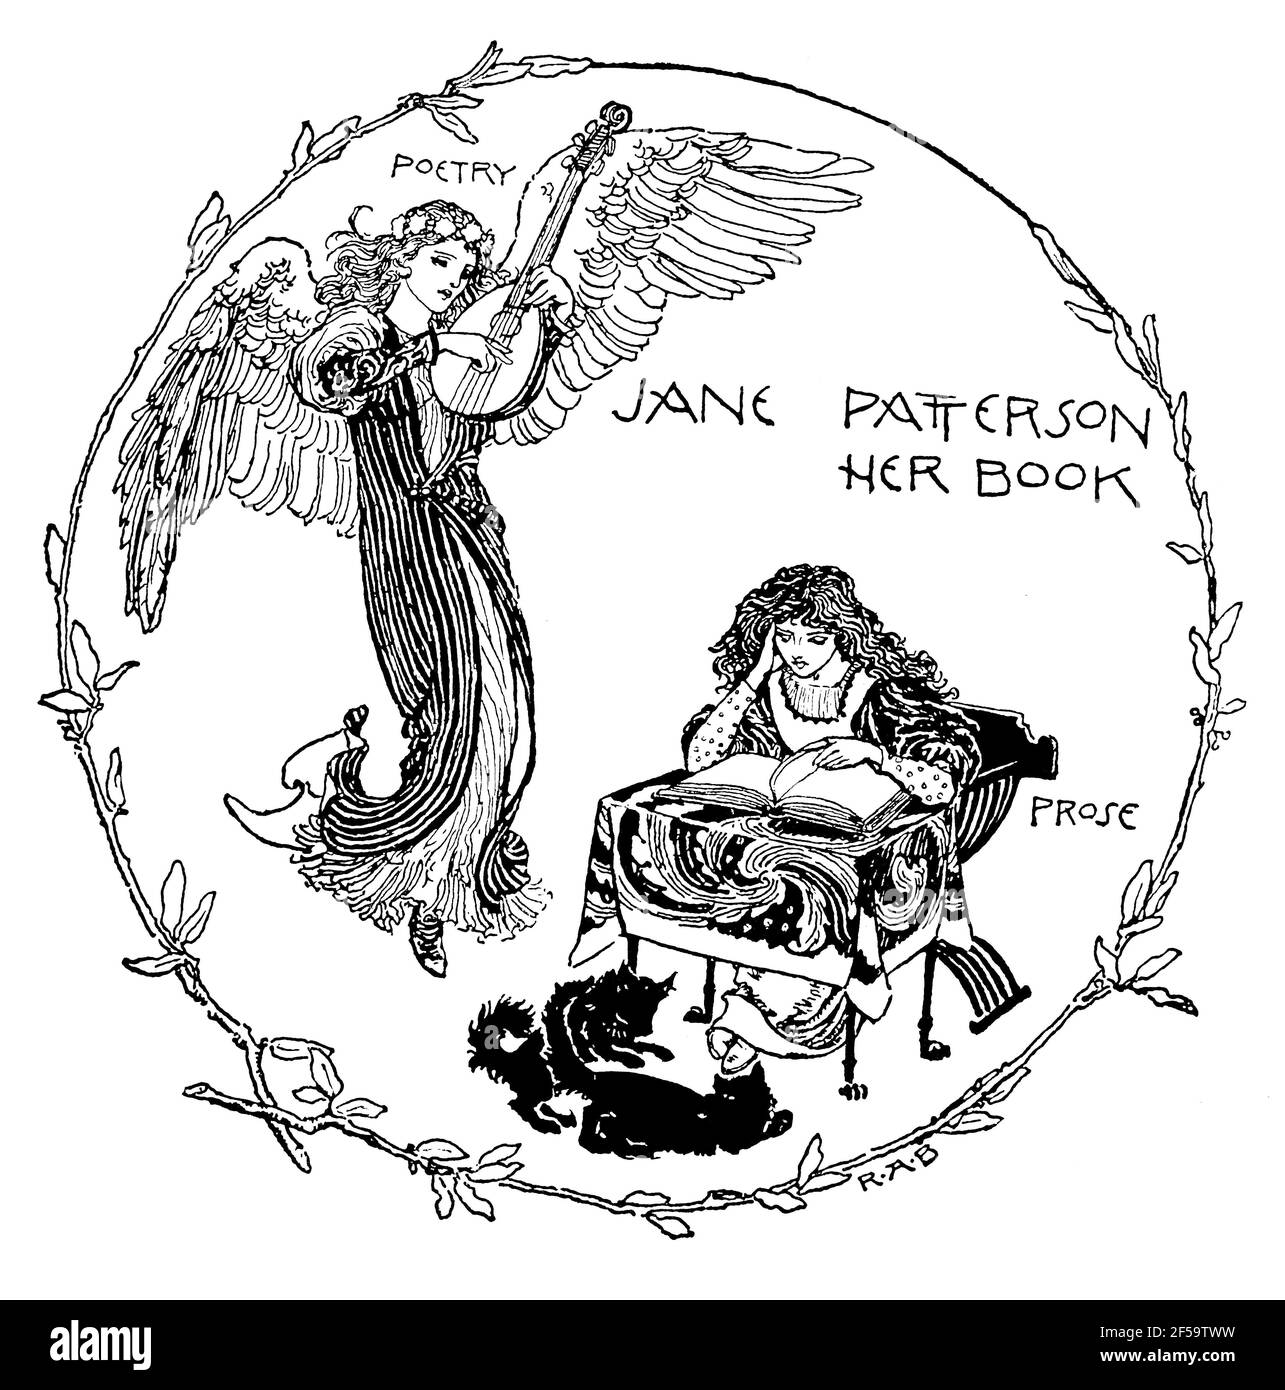 Poetry and Prose muses bookplate for Jane Patterson by Robert Anning Bell Stock Photo